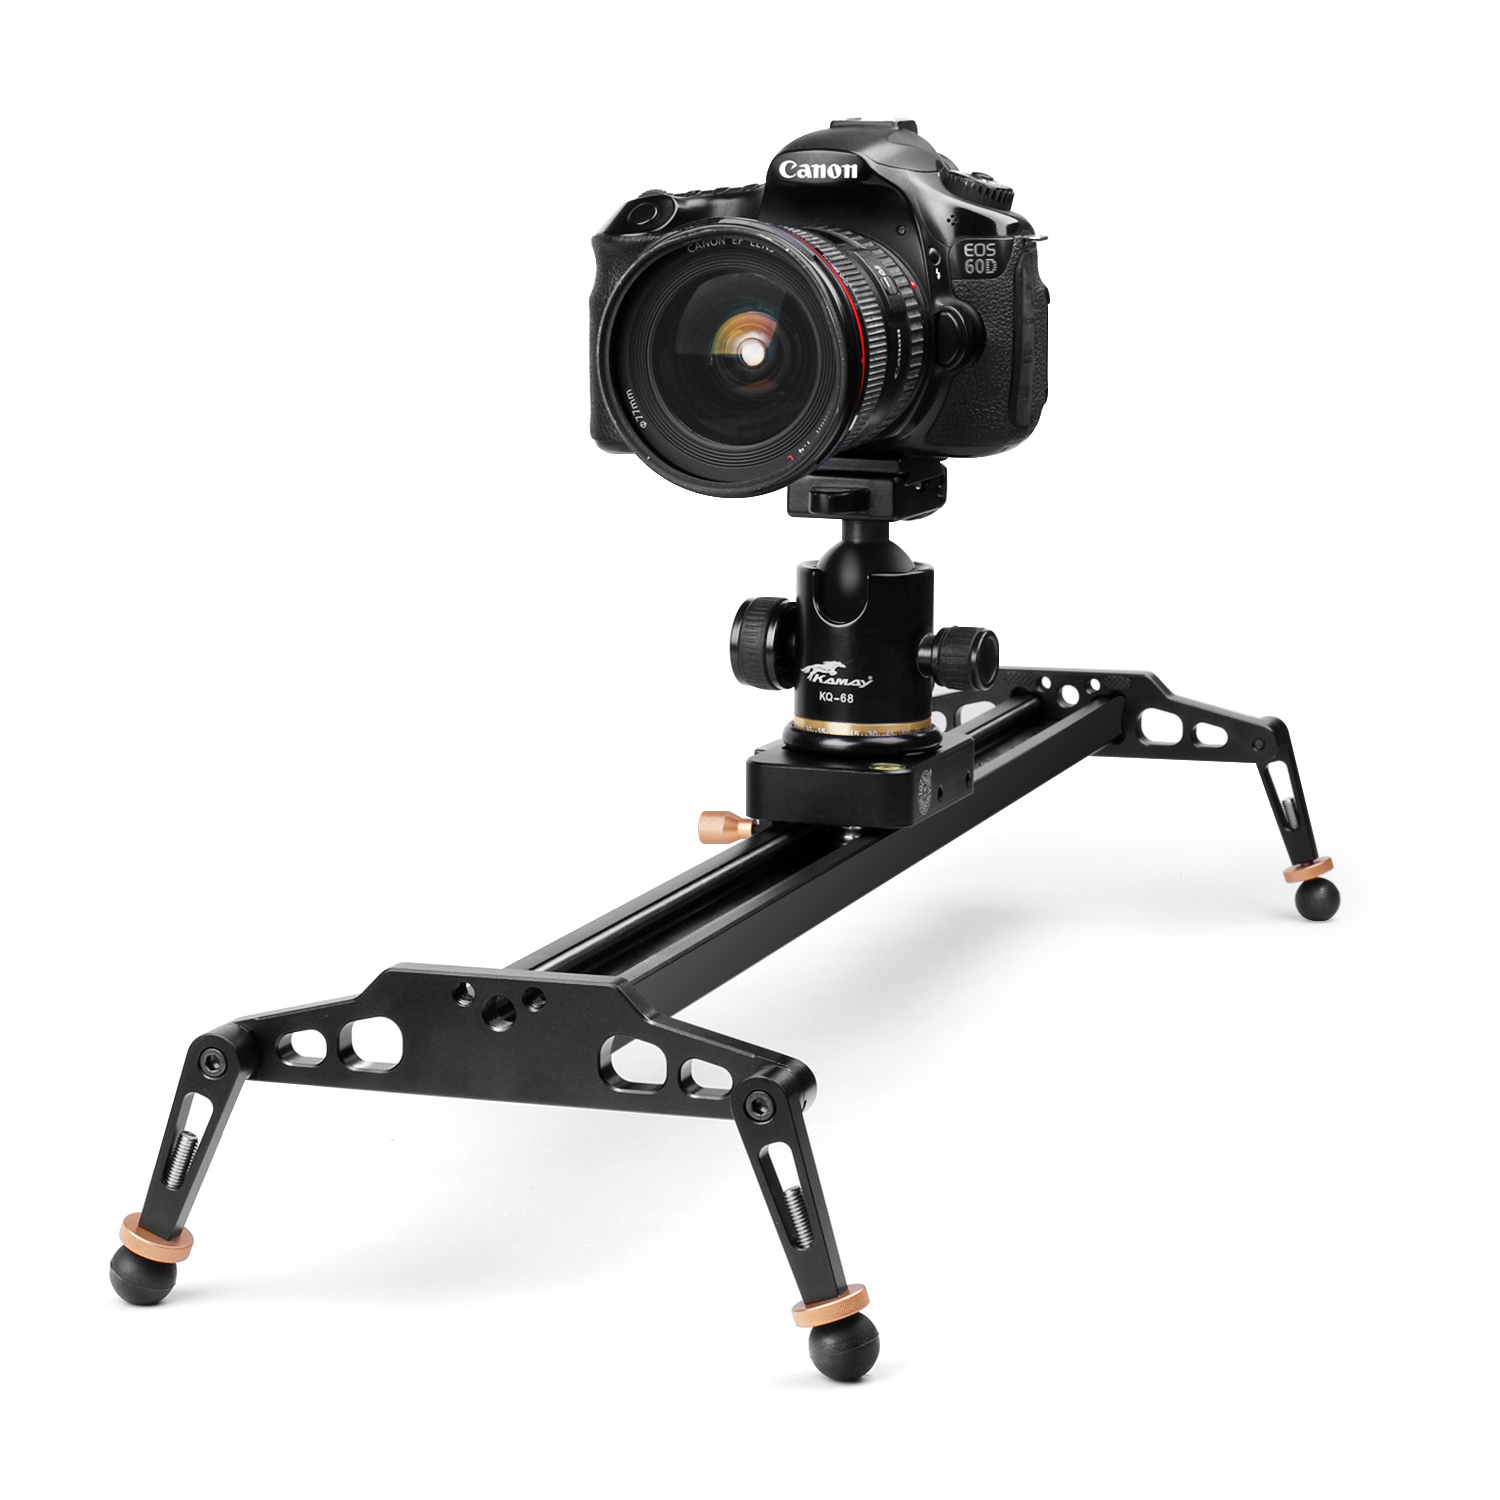 32"/80cm DSLR Camera Track Slider Dolly Video DV Stabilization Stabilizer Rail System with 17.6lbs/8kg Load Capacity and Perfect for Studio Photography and Video